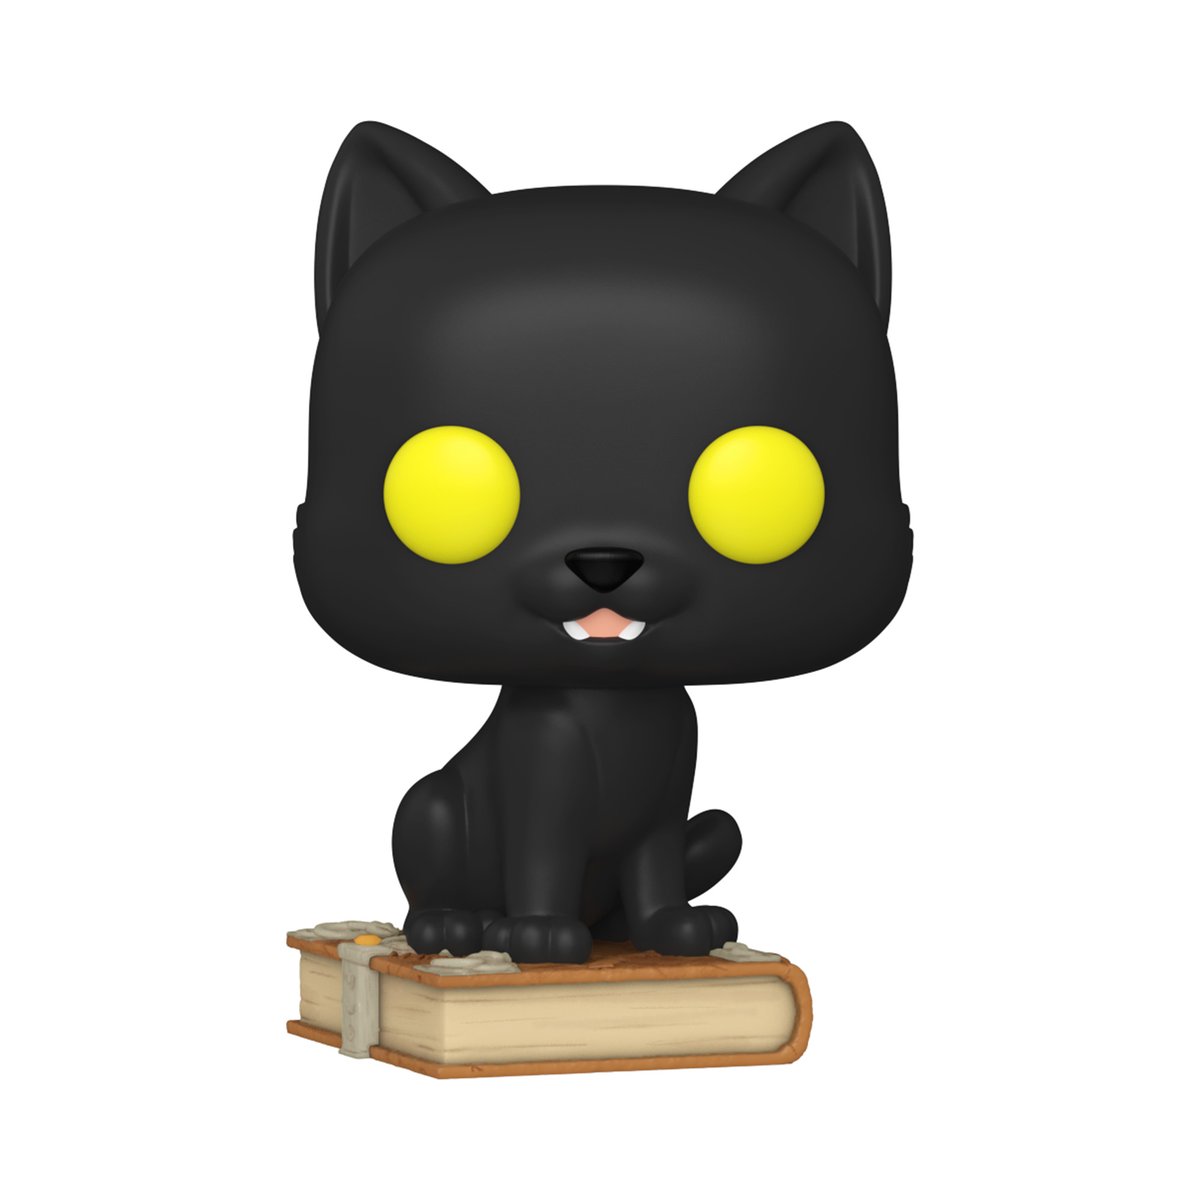 RT & follow @originalfunko for the chance to WIN this Funko shop exclusive Hocus Pocus: Thackery Binx POP! Not feeling lucky? Order now: bit.ly/3gW5Xit #FunkoPOP #Funkogiveaway #Halloween #NationalCatDay